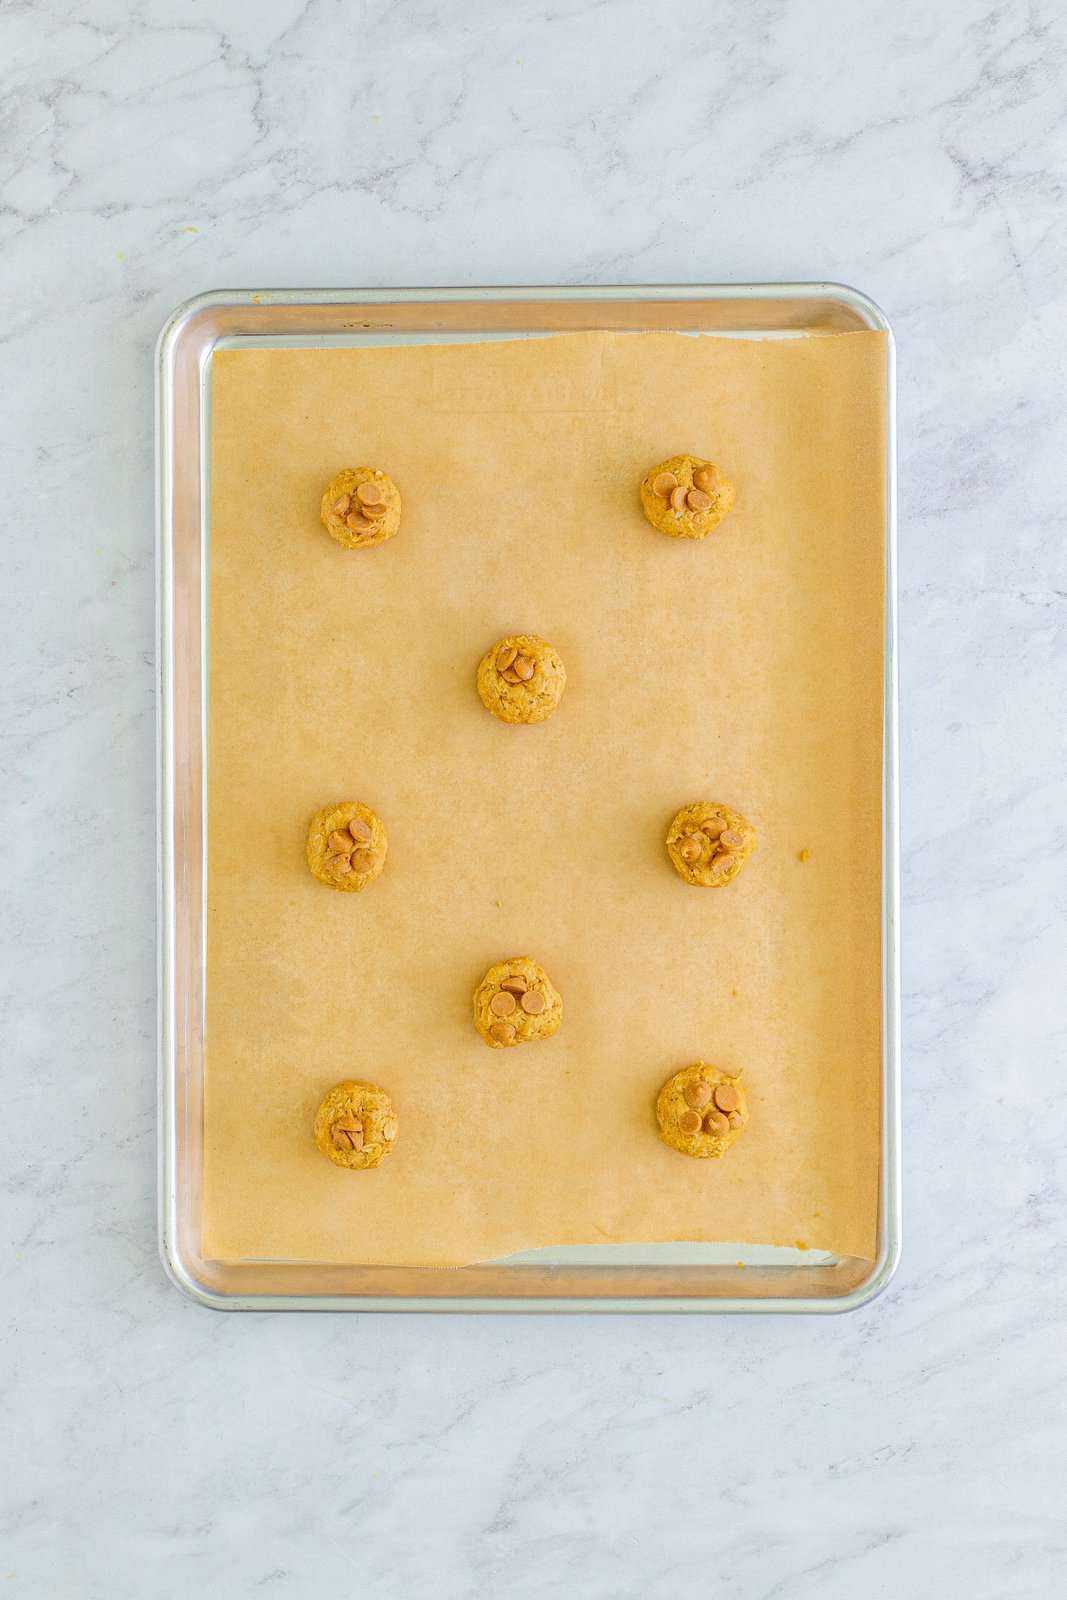 Dough balls with peanut butter chips on parchment lined baking sheet.